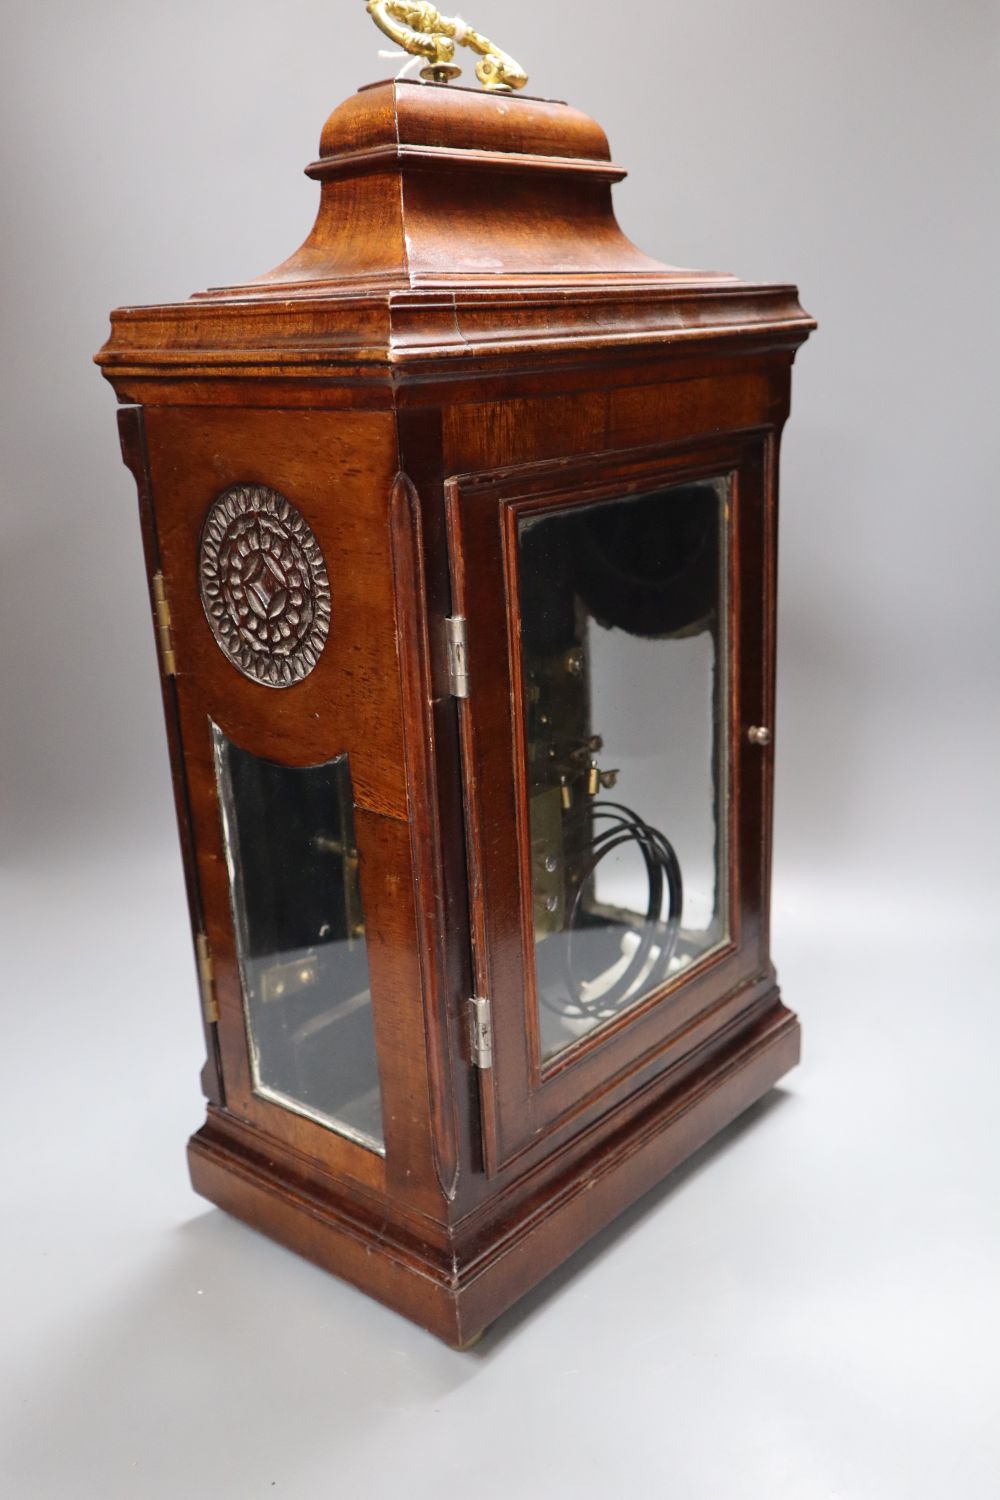 A George III-style mahogany mantel clock, 5.75 inch arched dial, gong striking movement, with key and pendulum, height 49cm